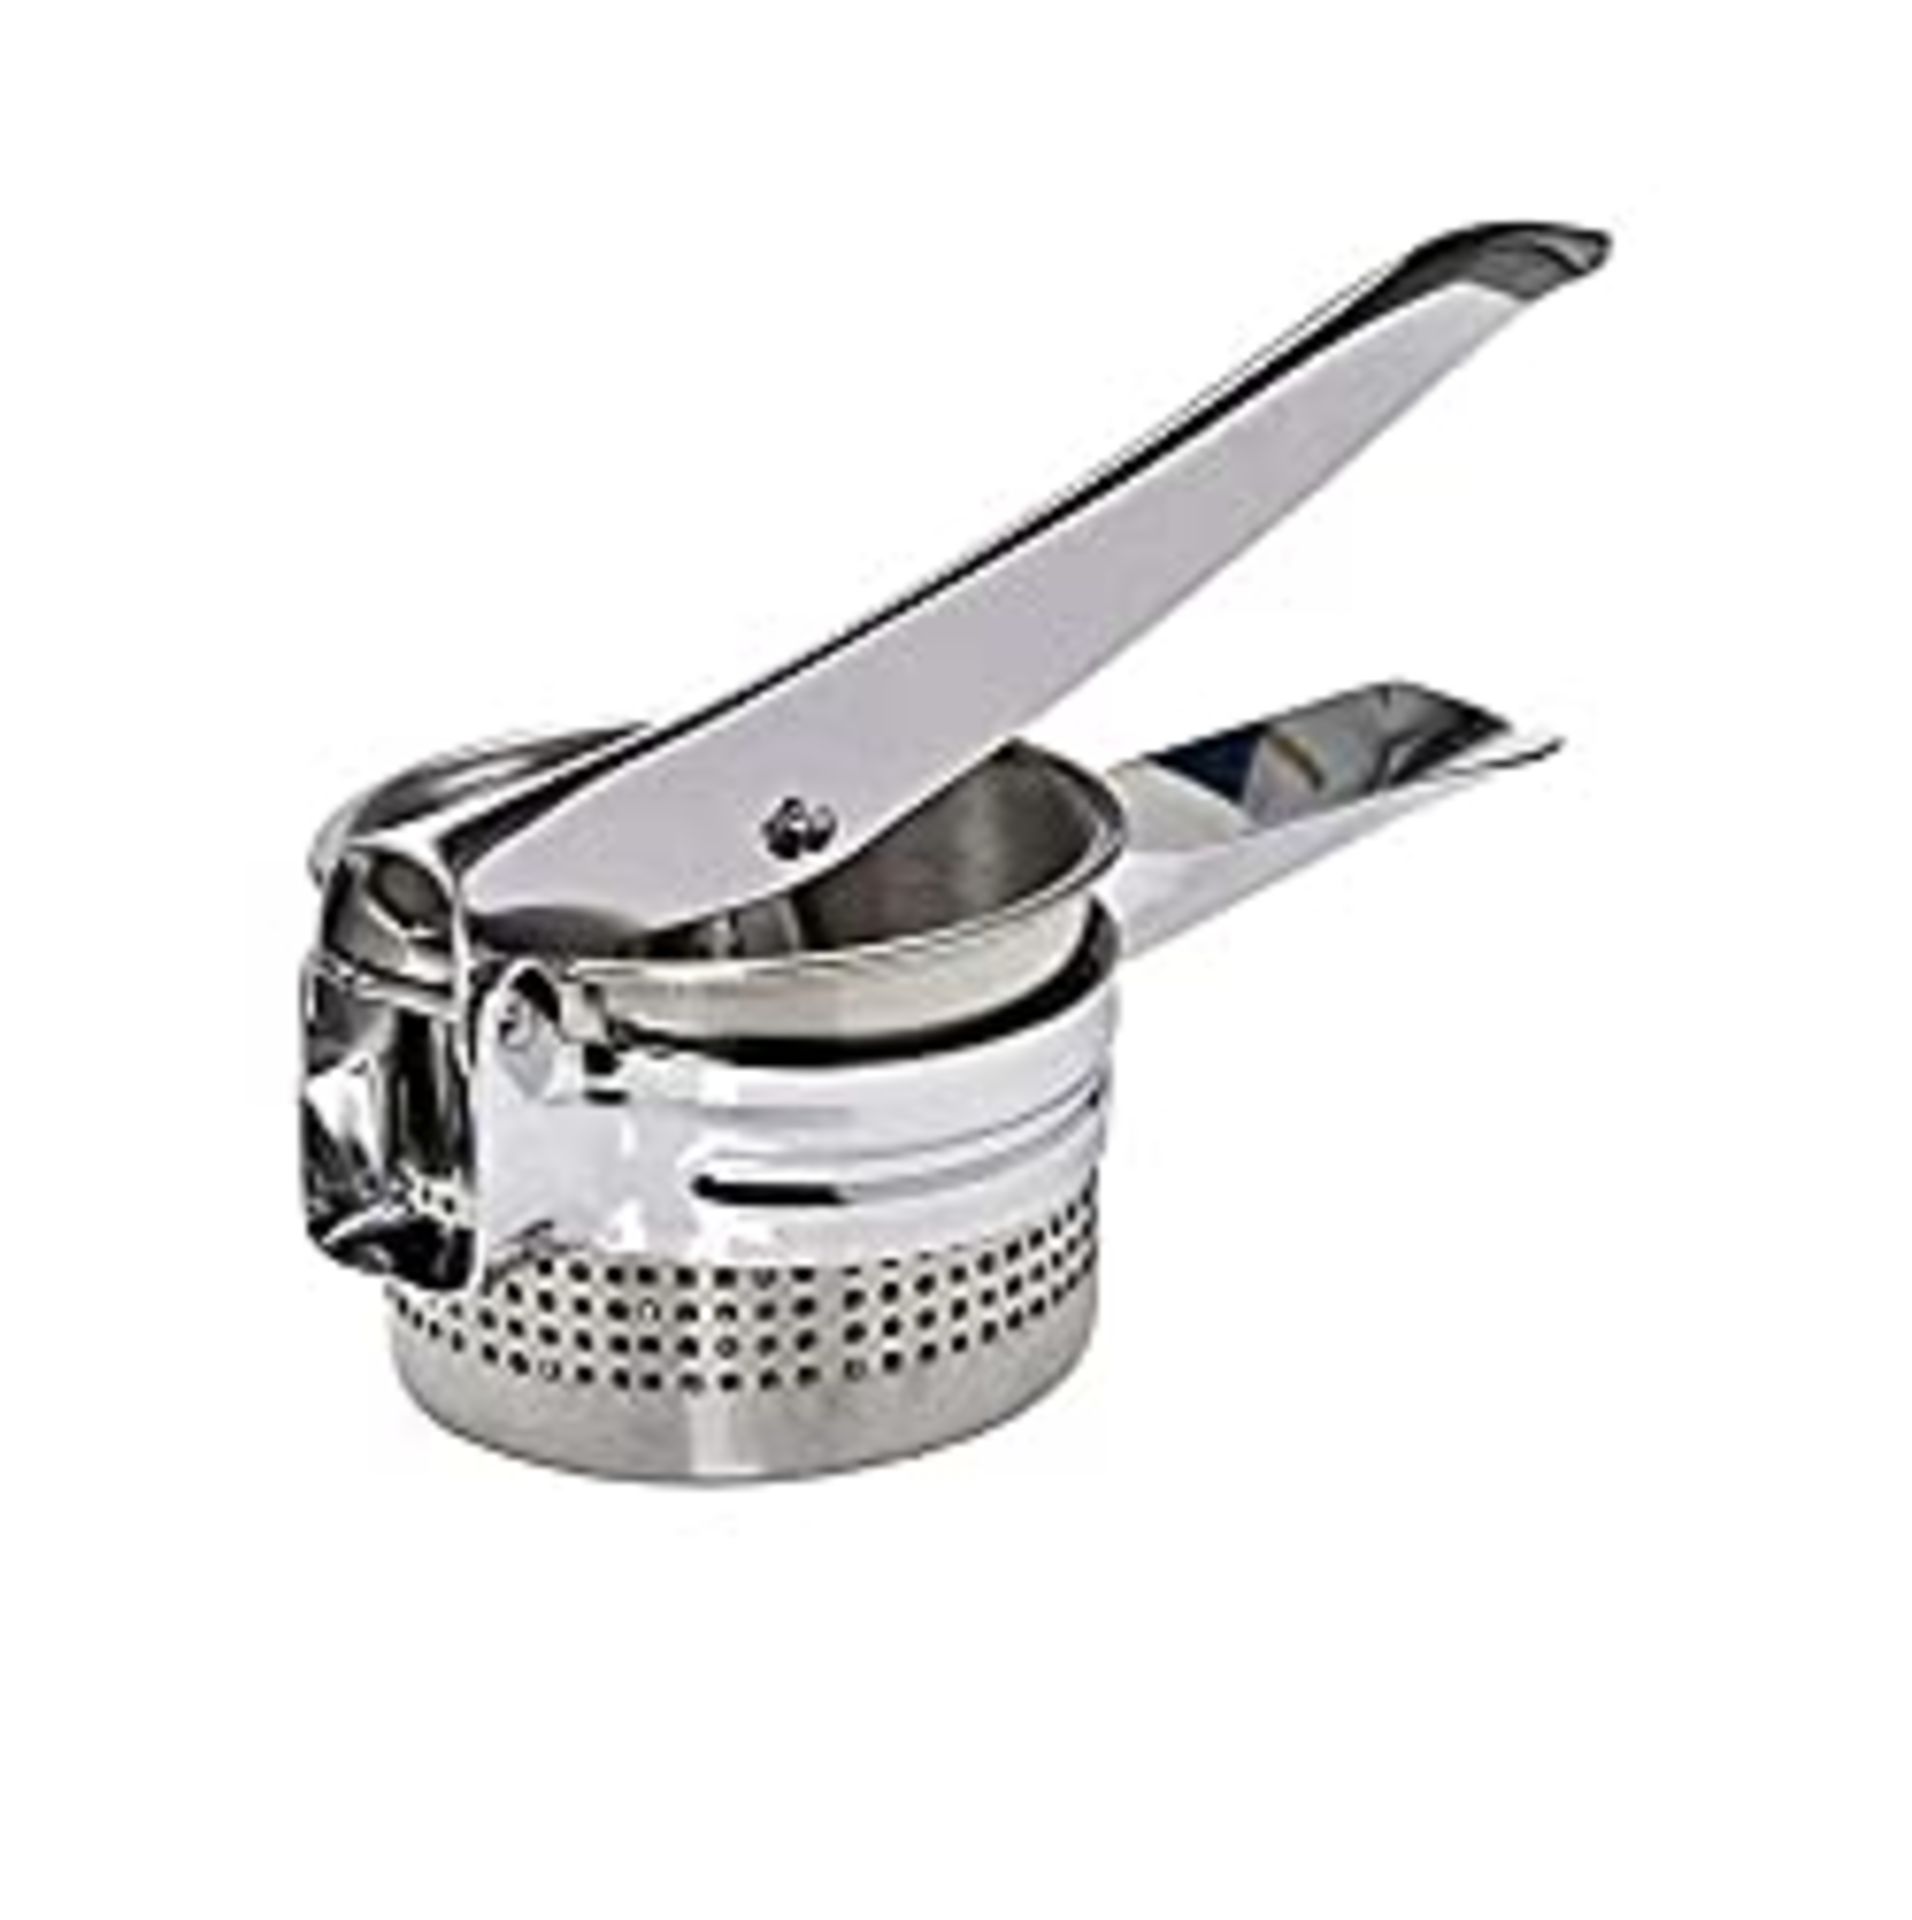 RRP £6.98 Bahob High Quality Potato Ricer and Masher